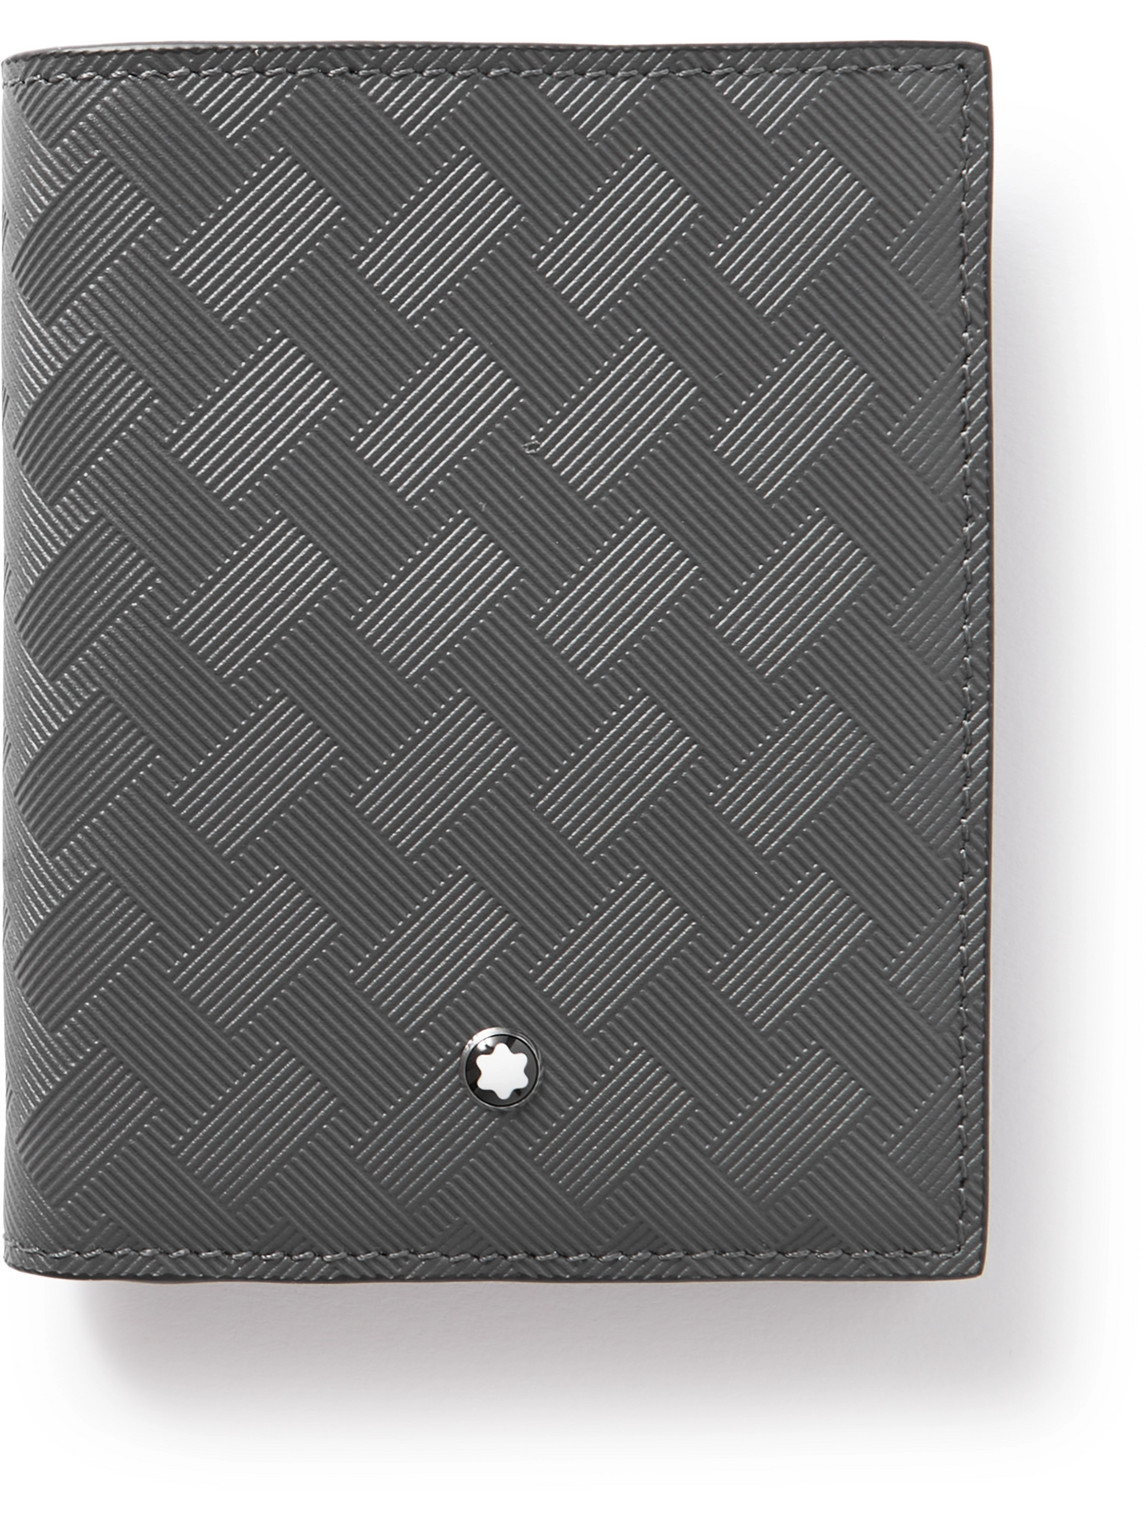 Montblanc Extreme 3.0 Cross-grain Leather Billfold Wallet In Gray